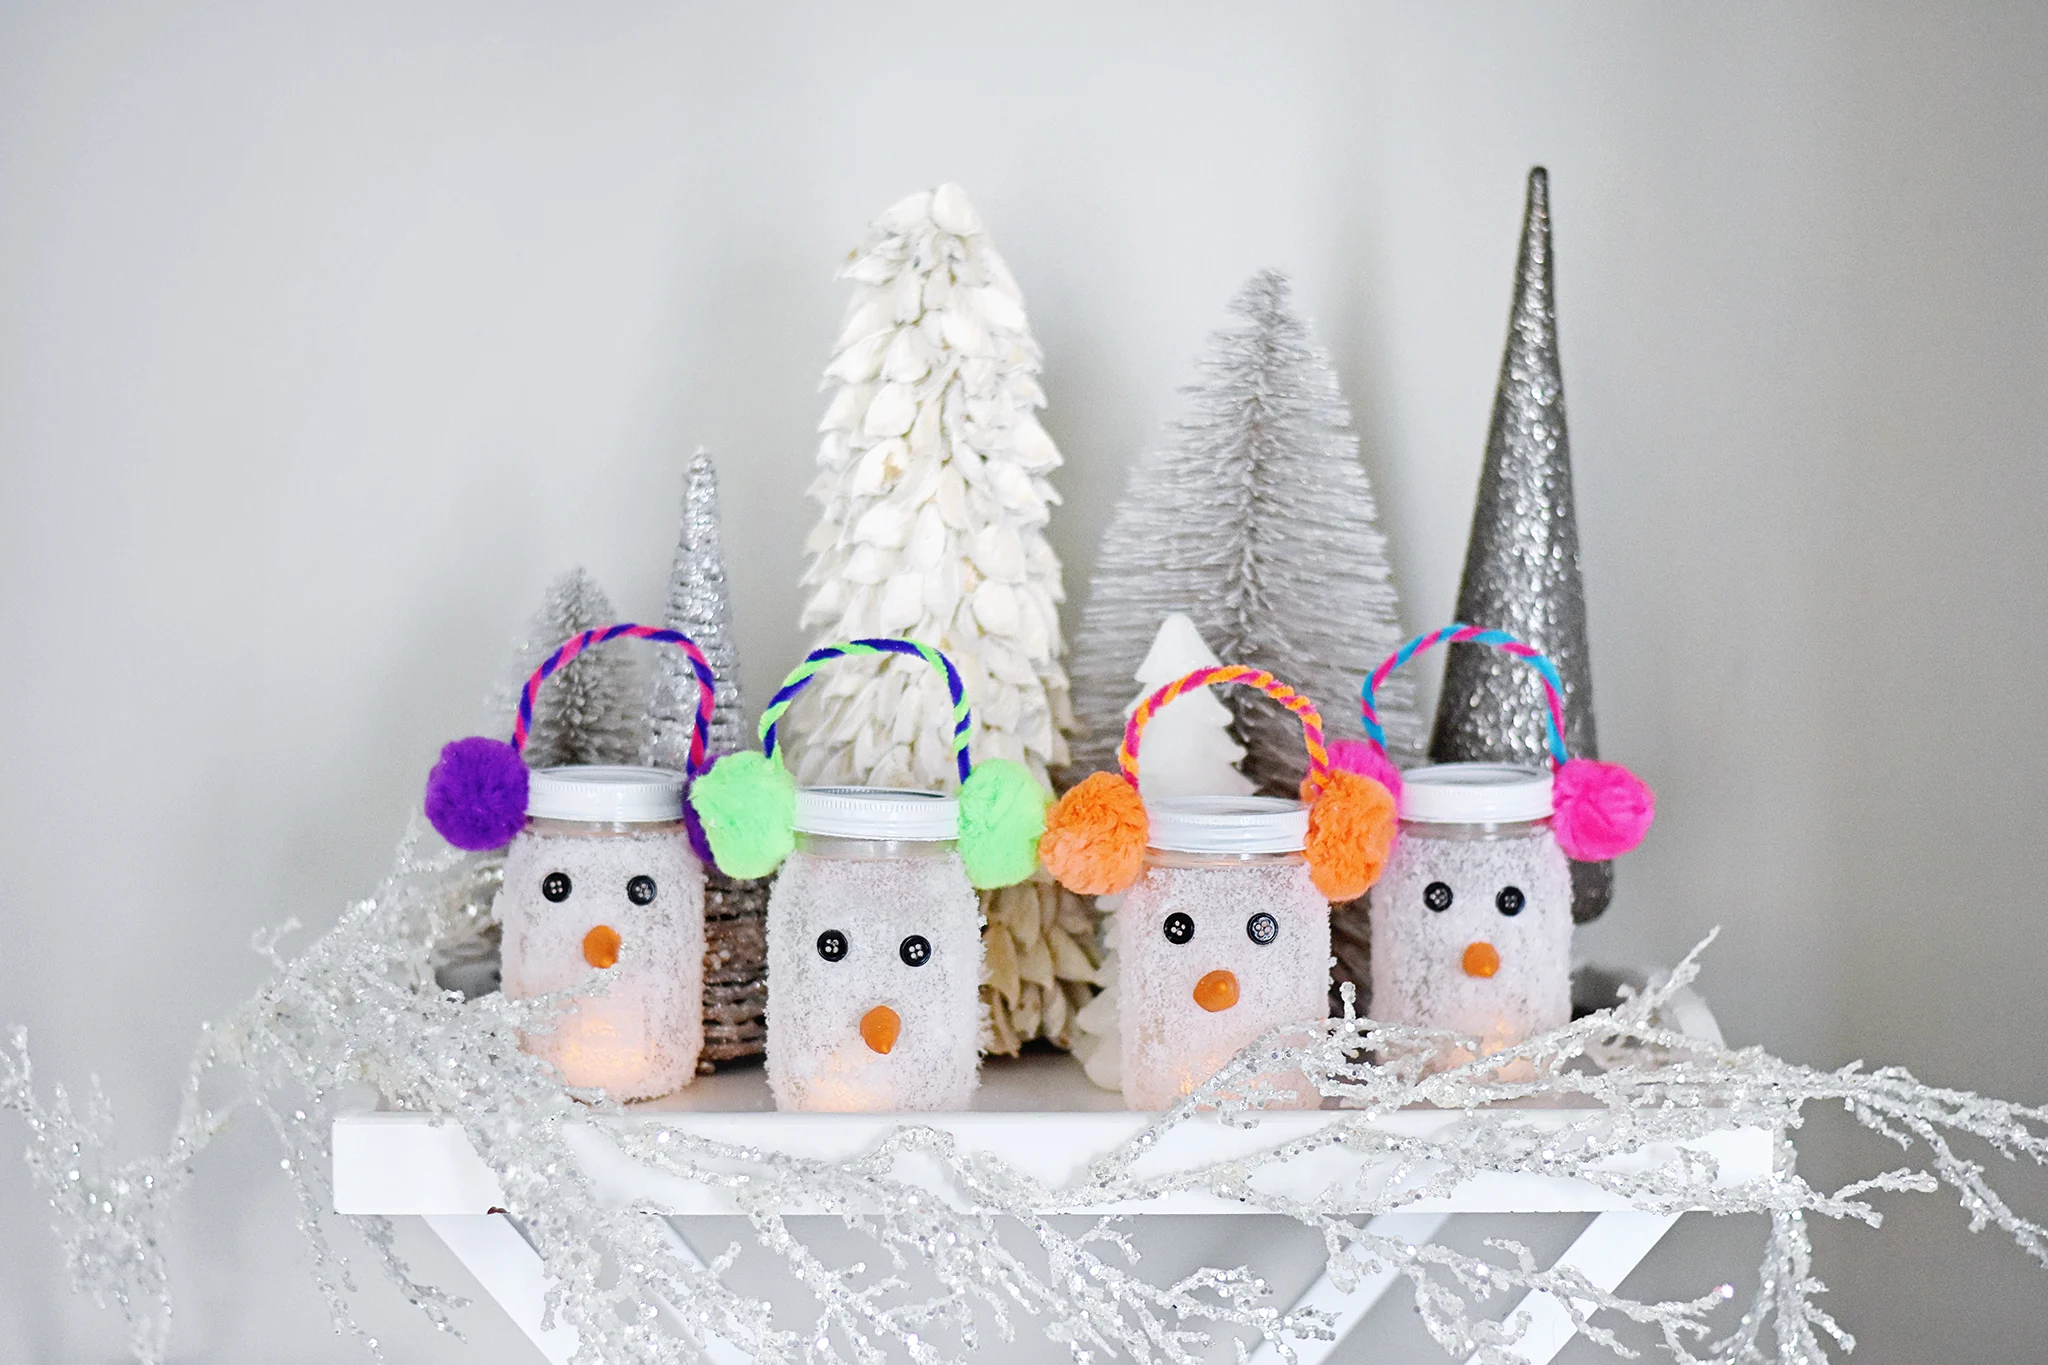 DIY Snowman Decorations: Create a Winter Wonderland with These